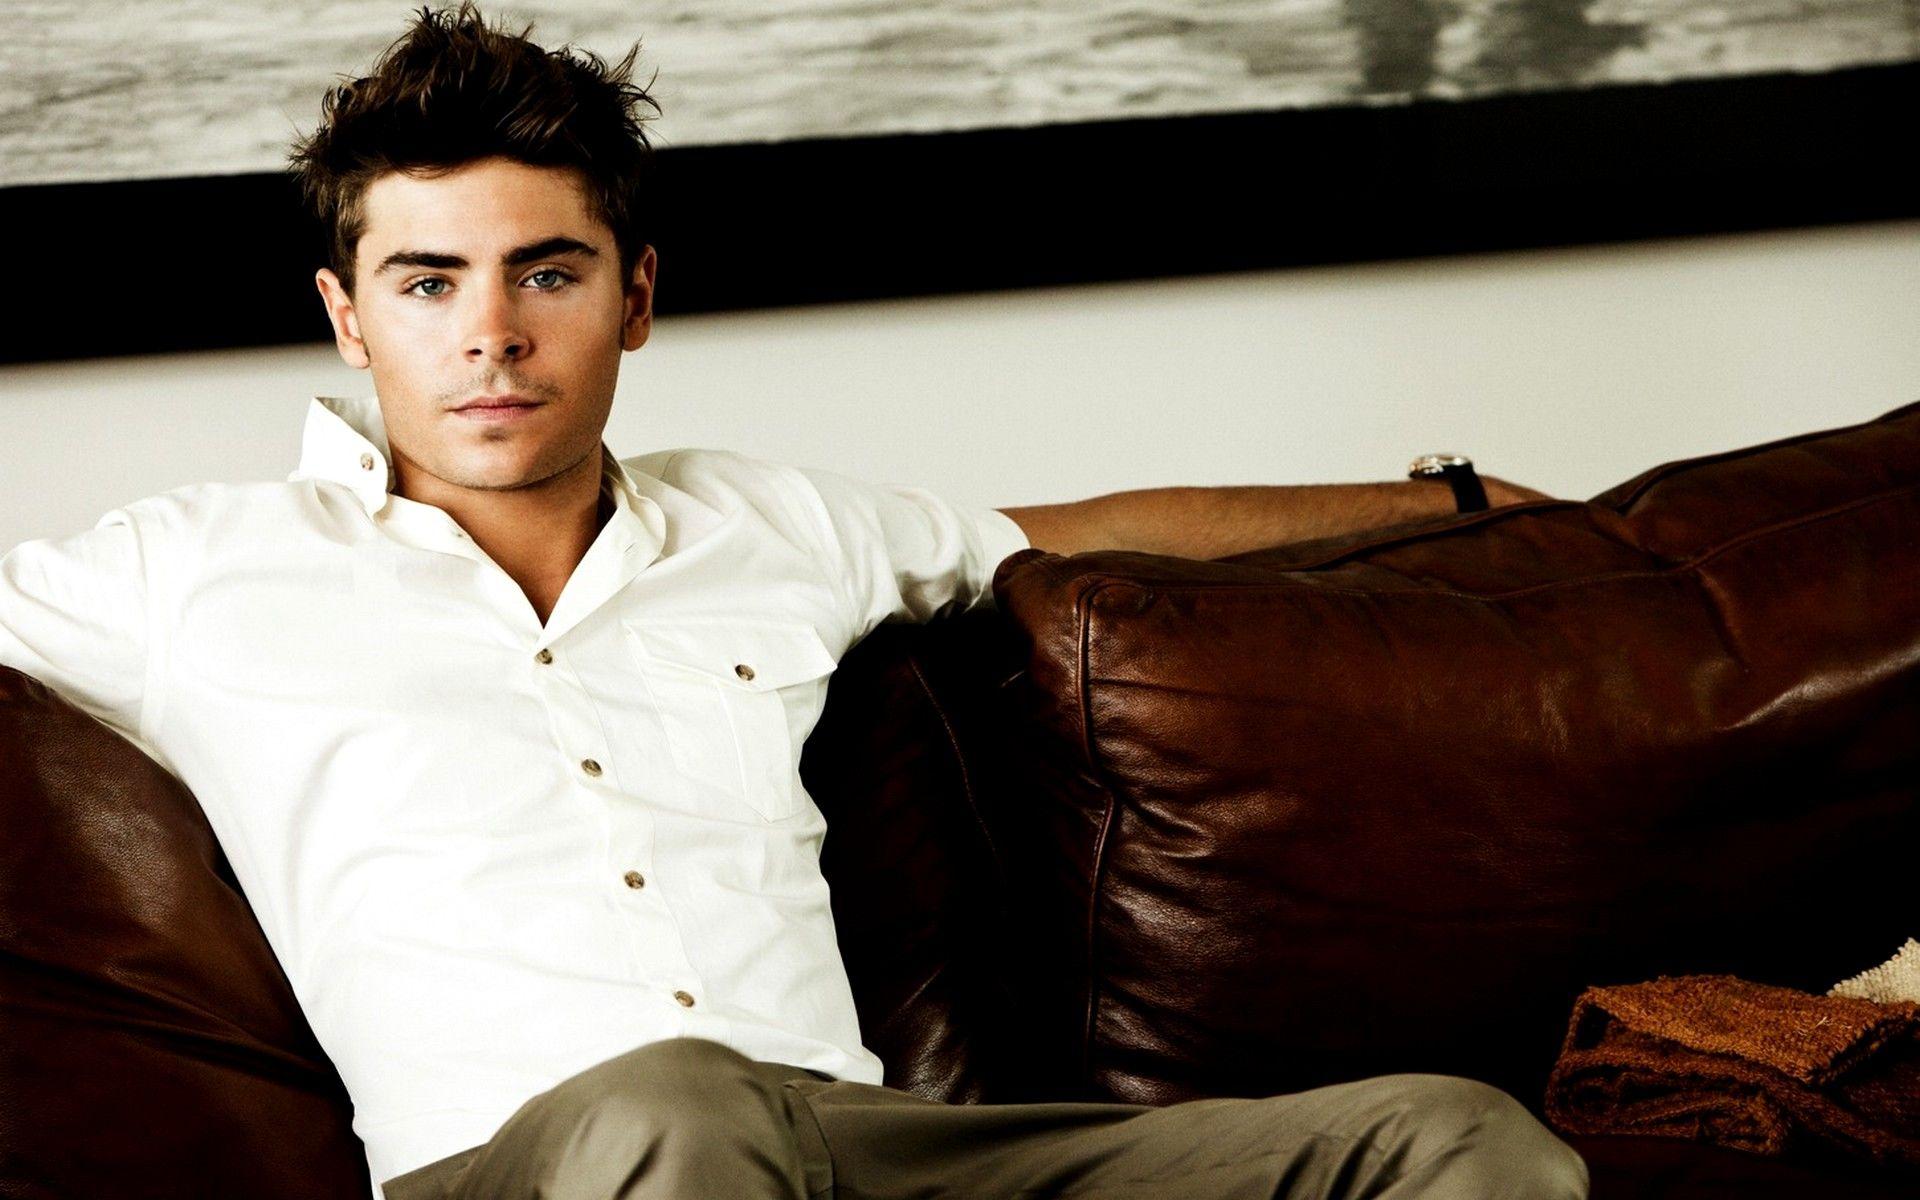 Zac Efron 2020 Wallpapers - Wallpaper Cave